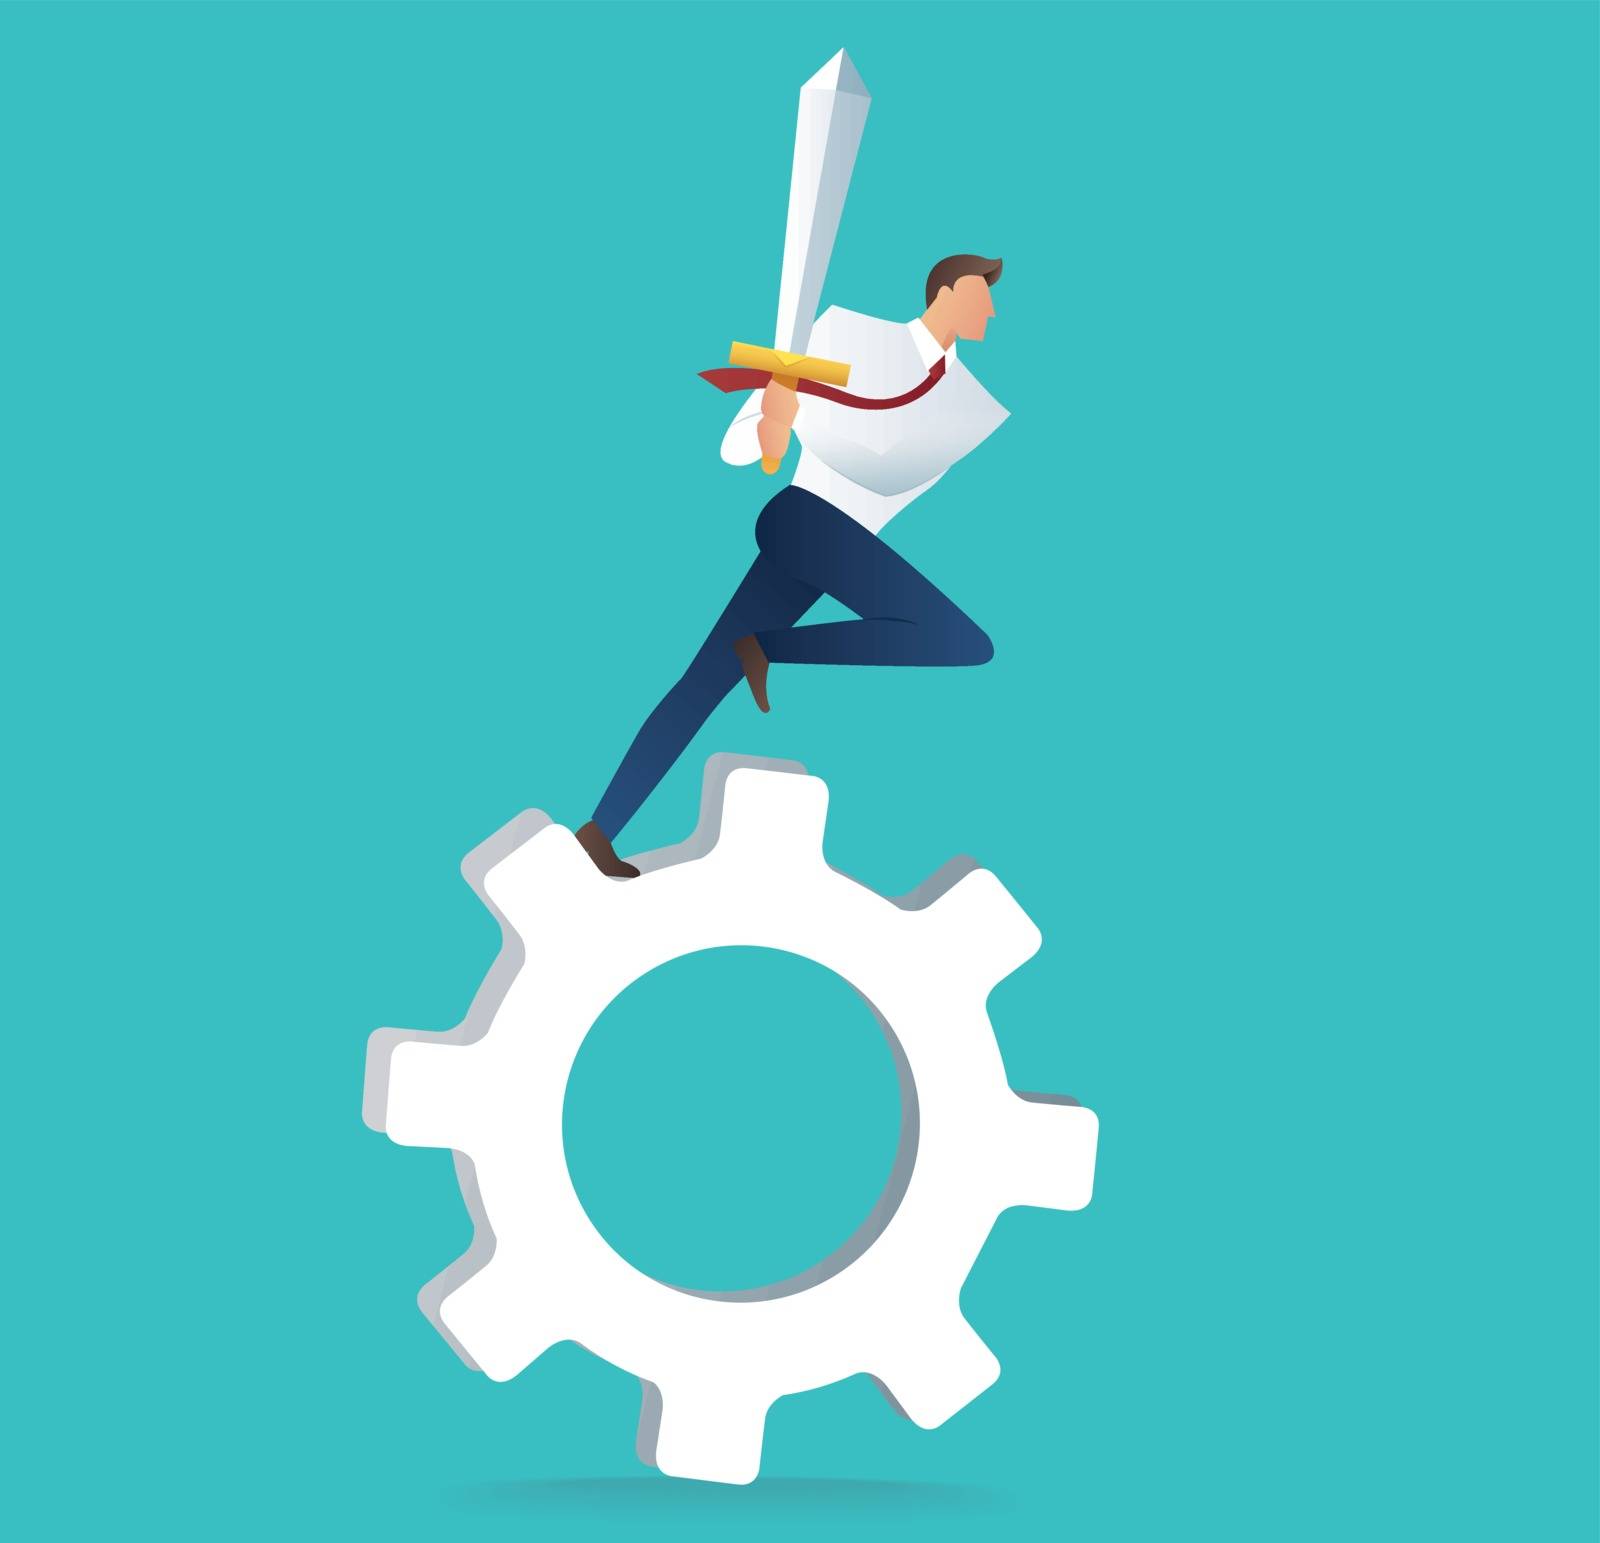 businessman holding sword on gear icon, concept of motivation for achievement vector illustration by h-santima